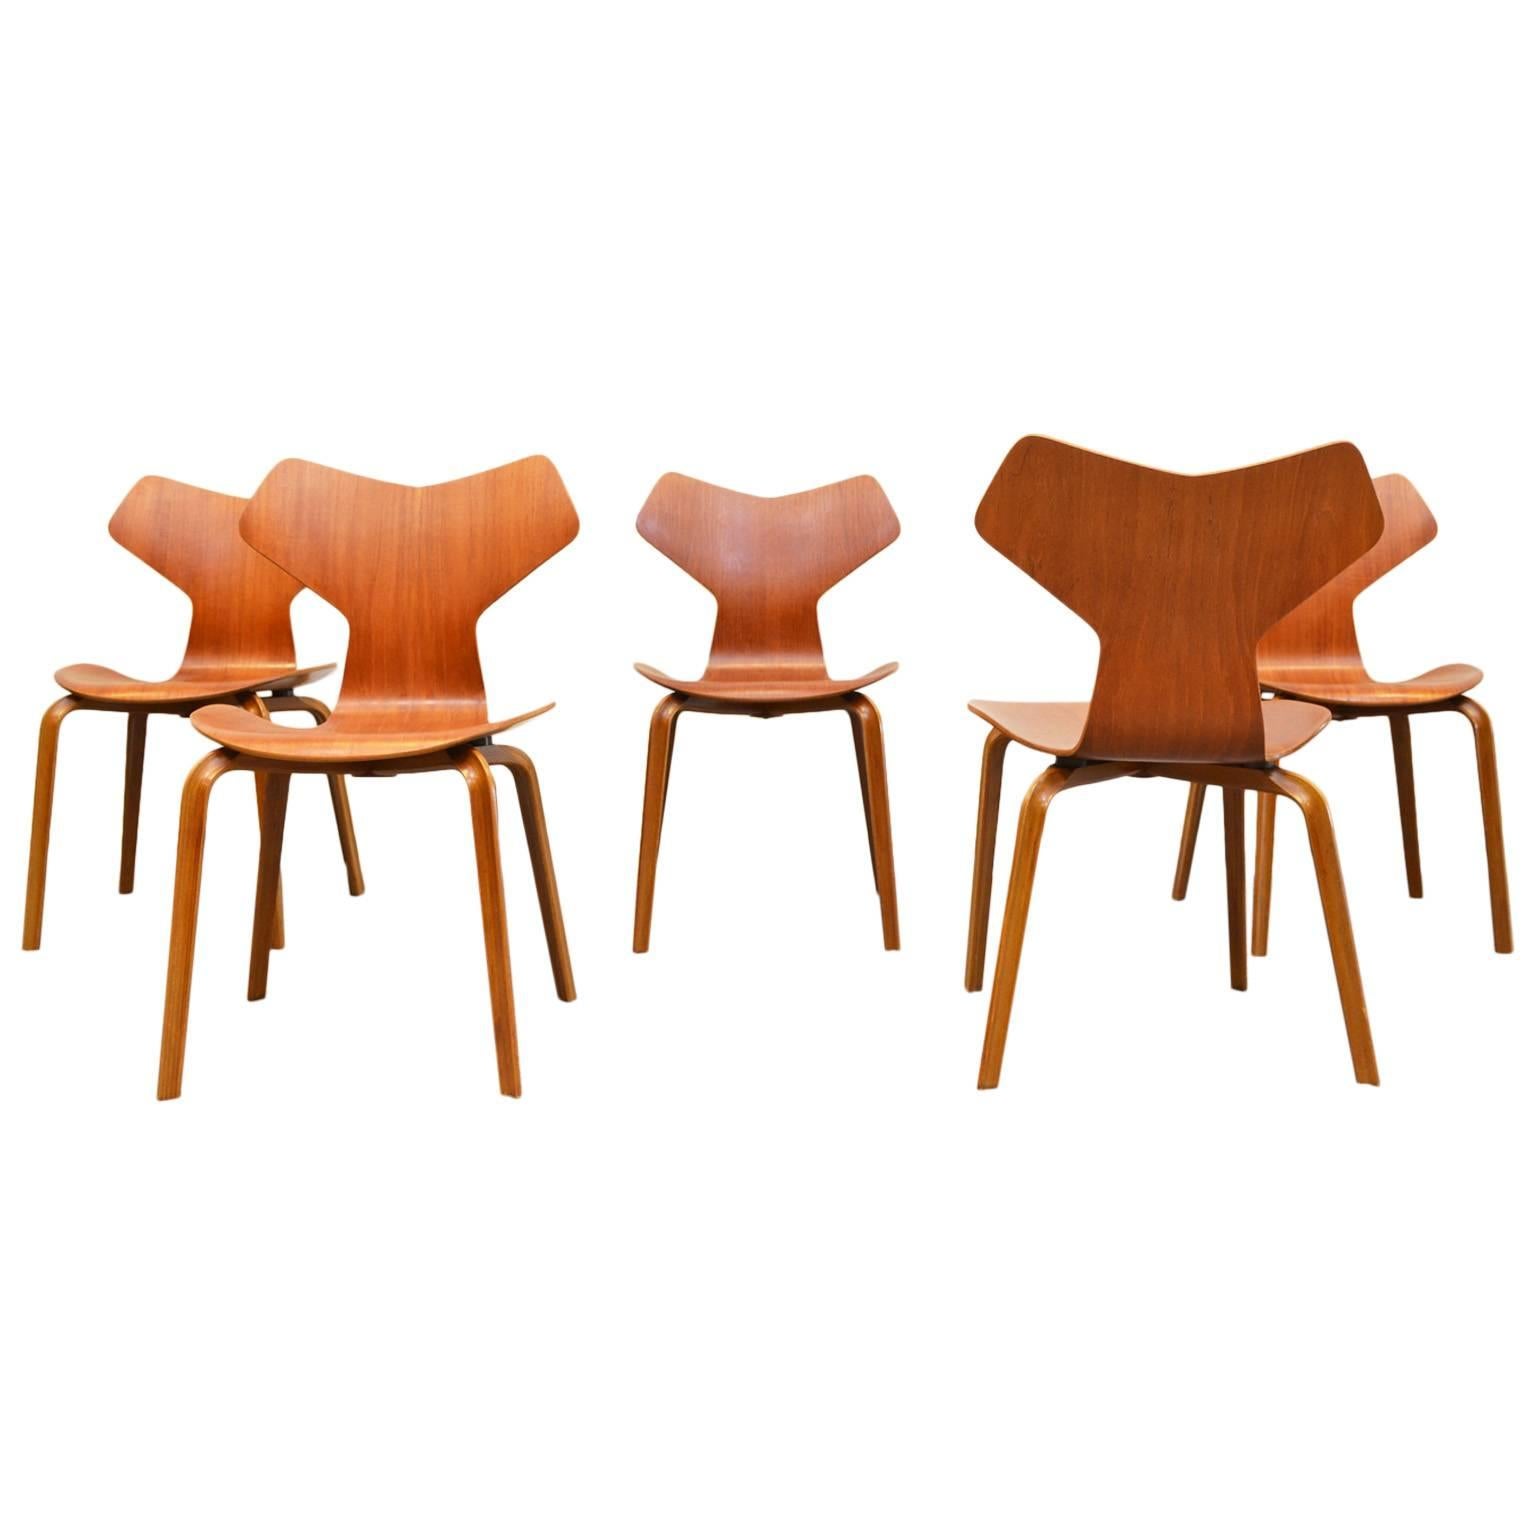 Grand Prix Chairs by Arne Jacobsen